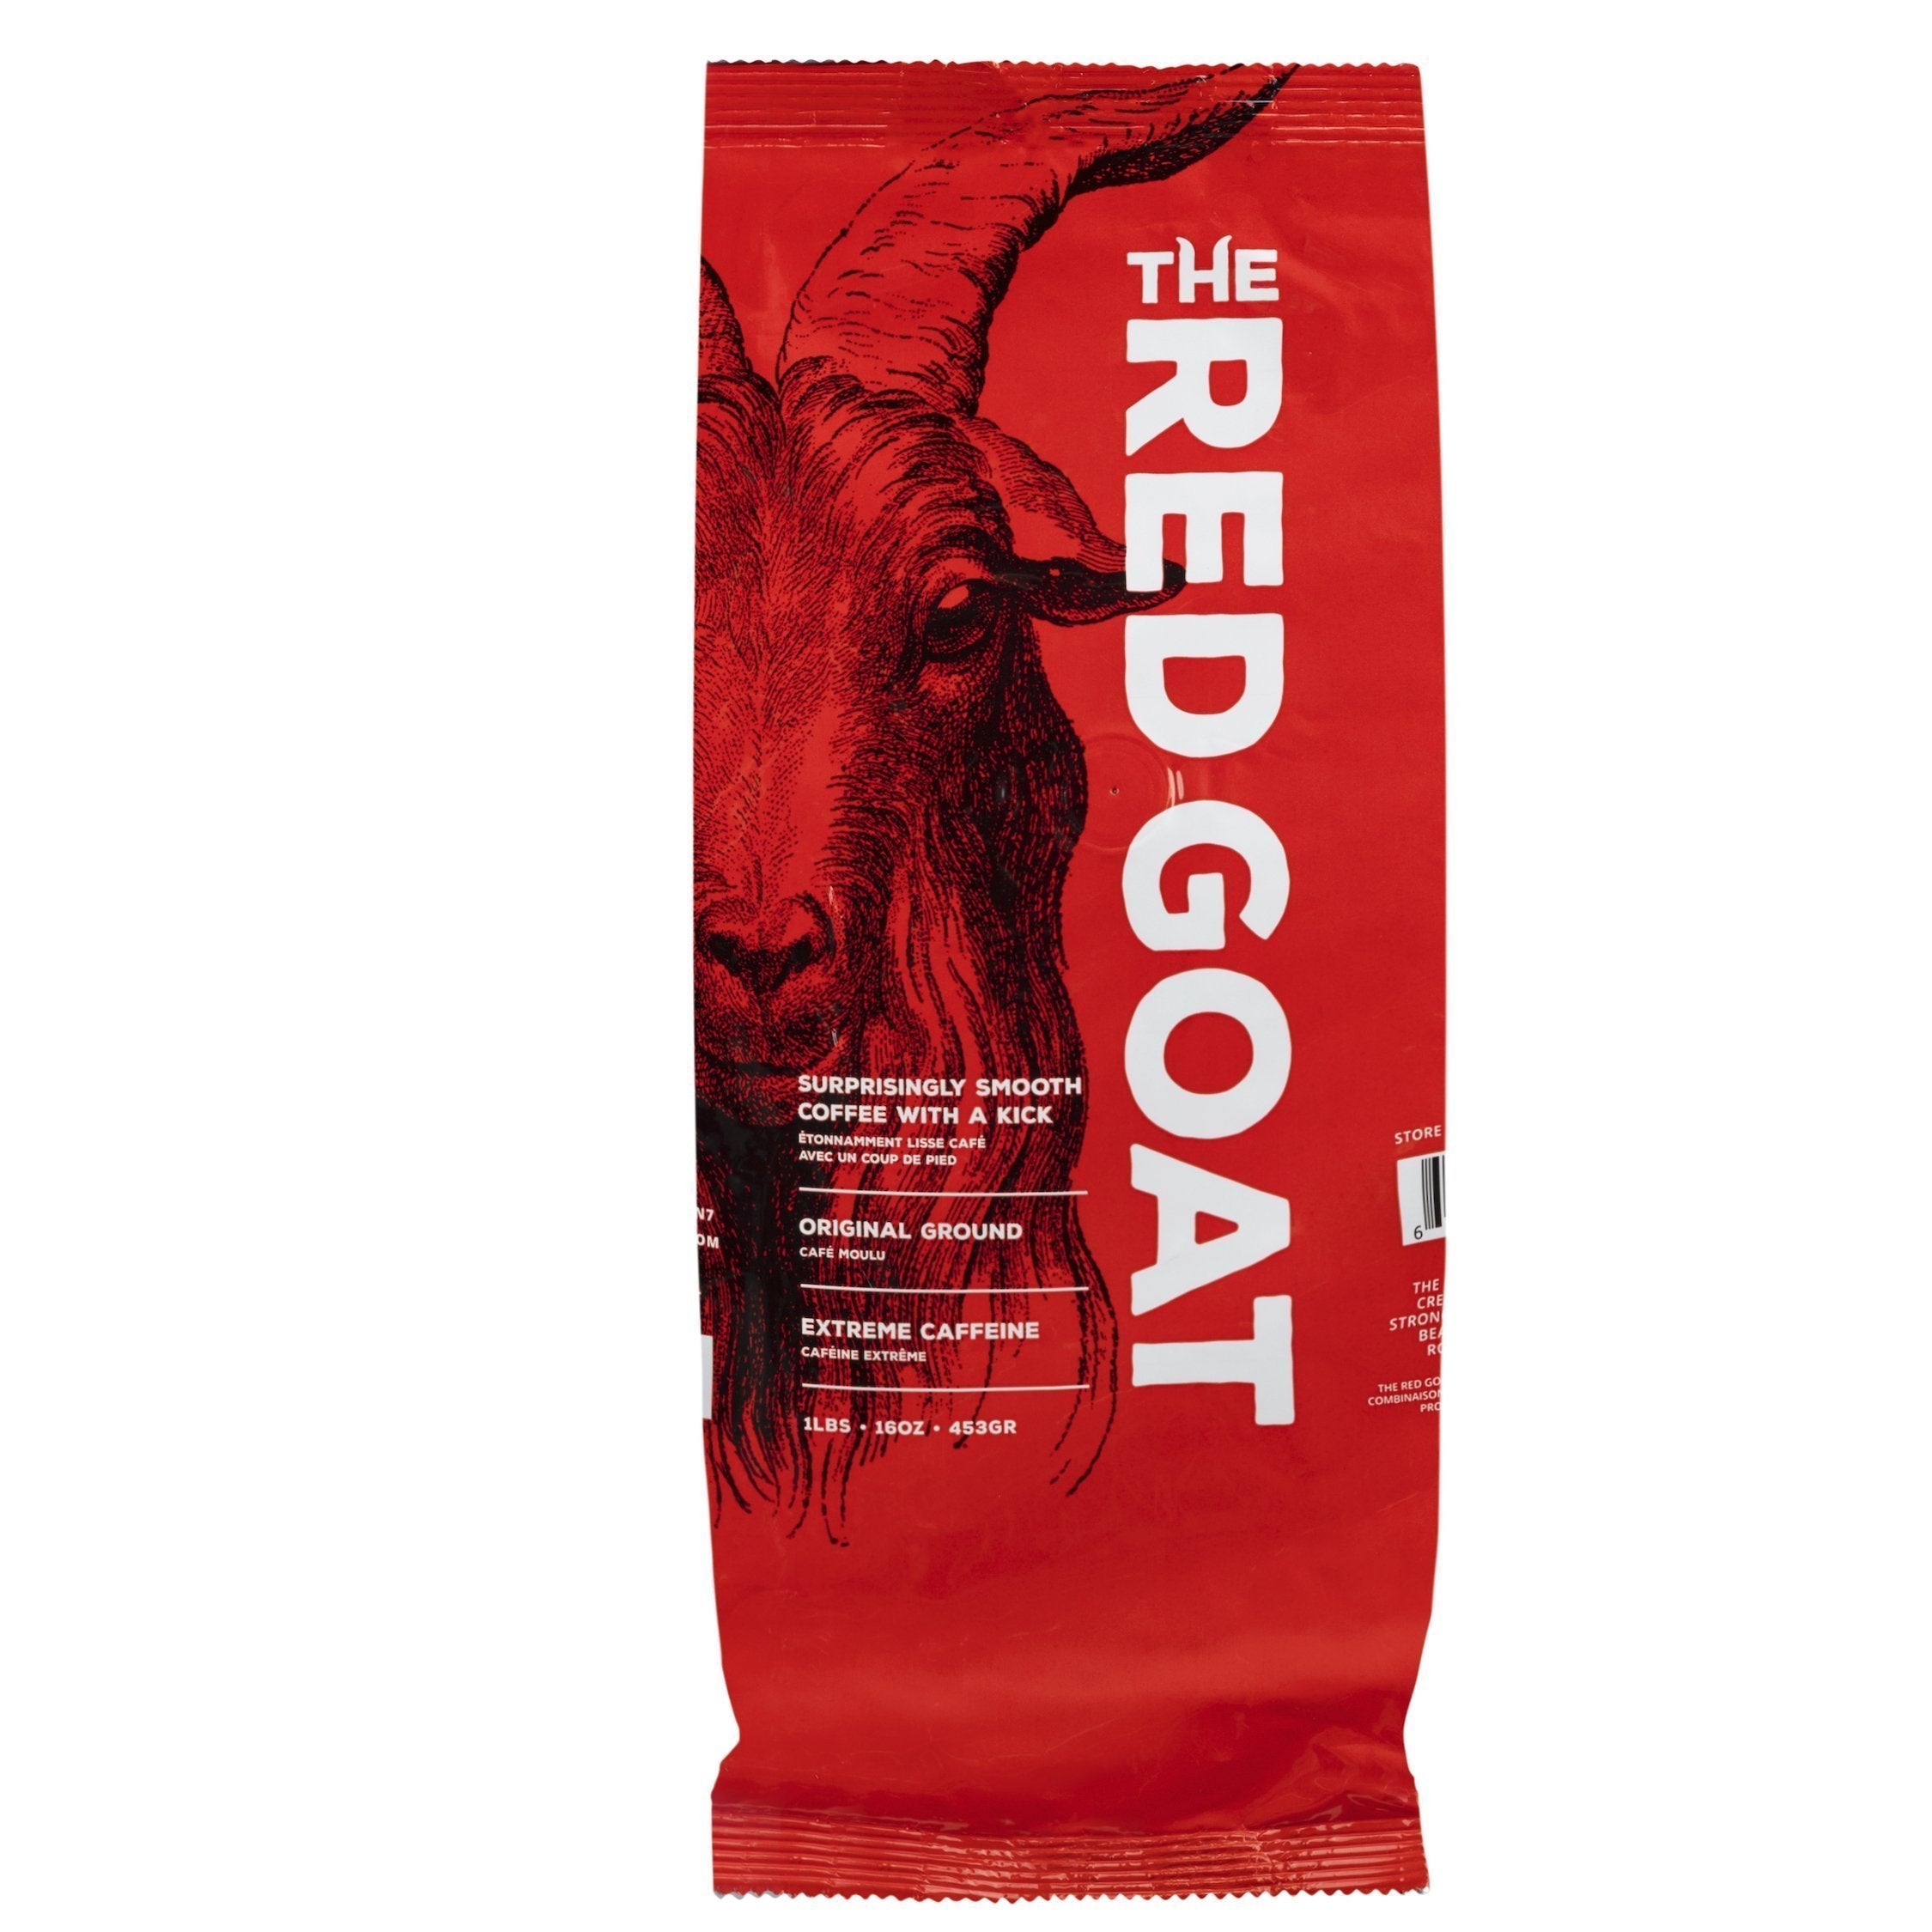 The Red Goat Coffee, Original Strong Ground Coffee, 1lb. - image 1 of 3